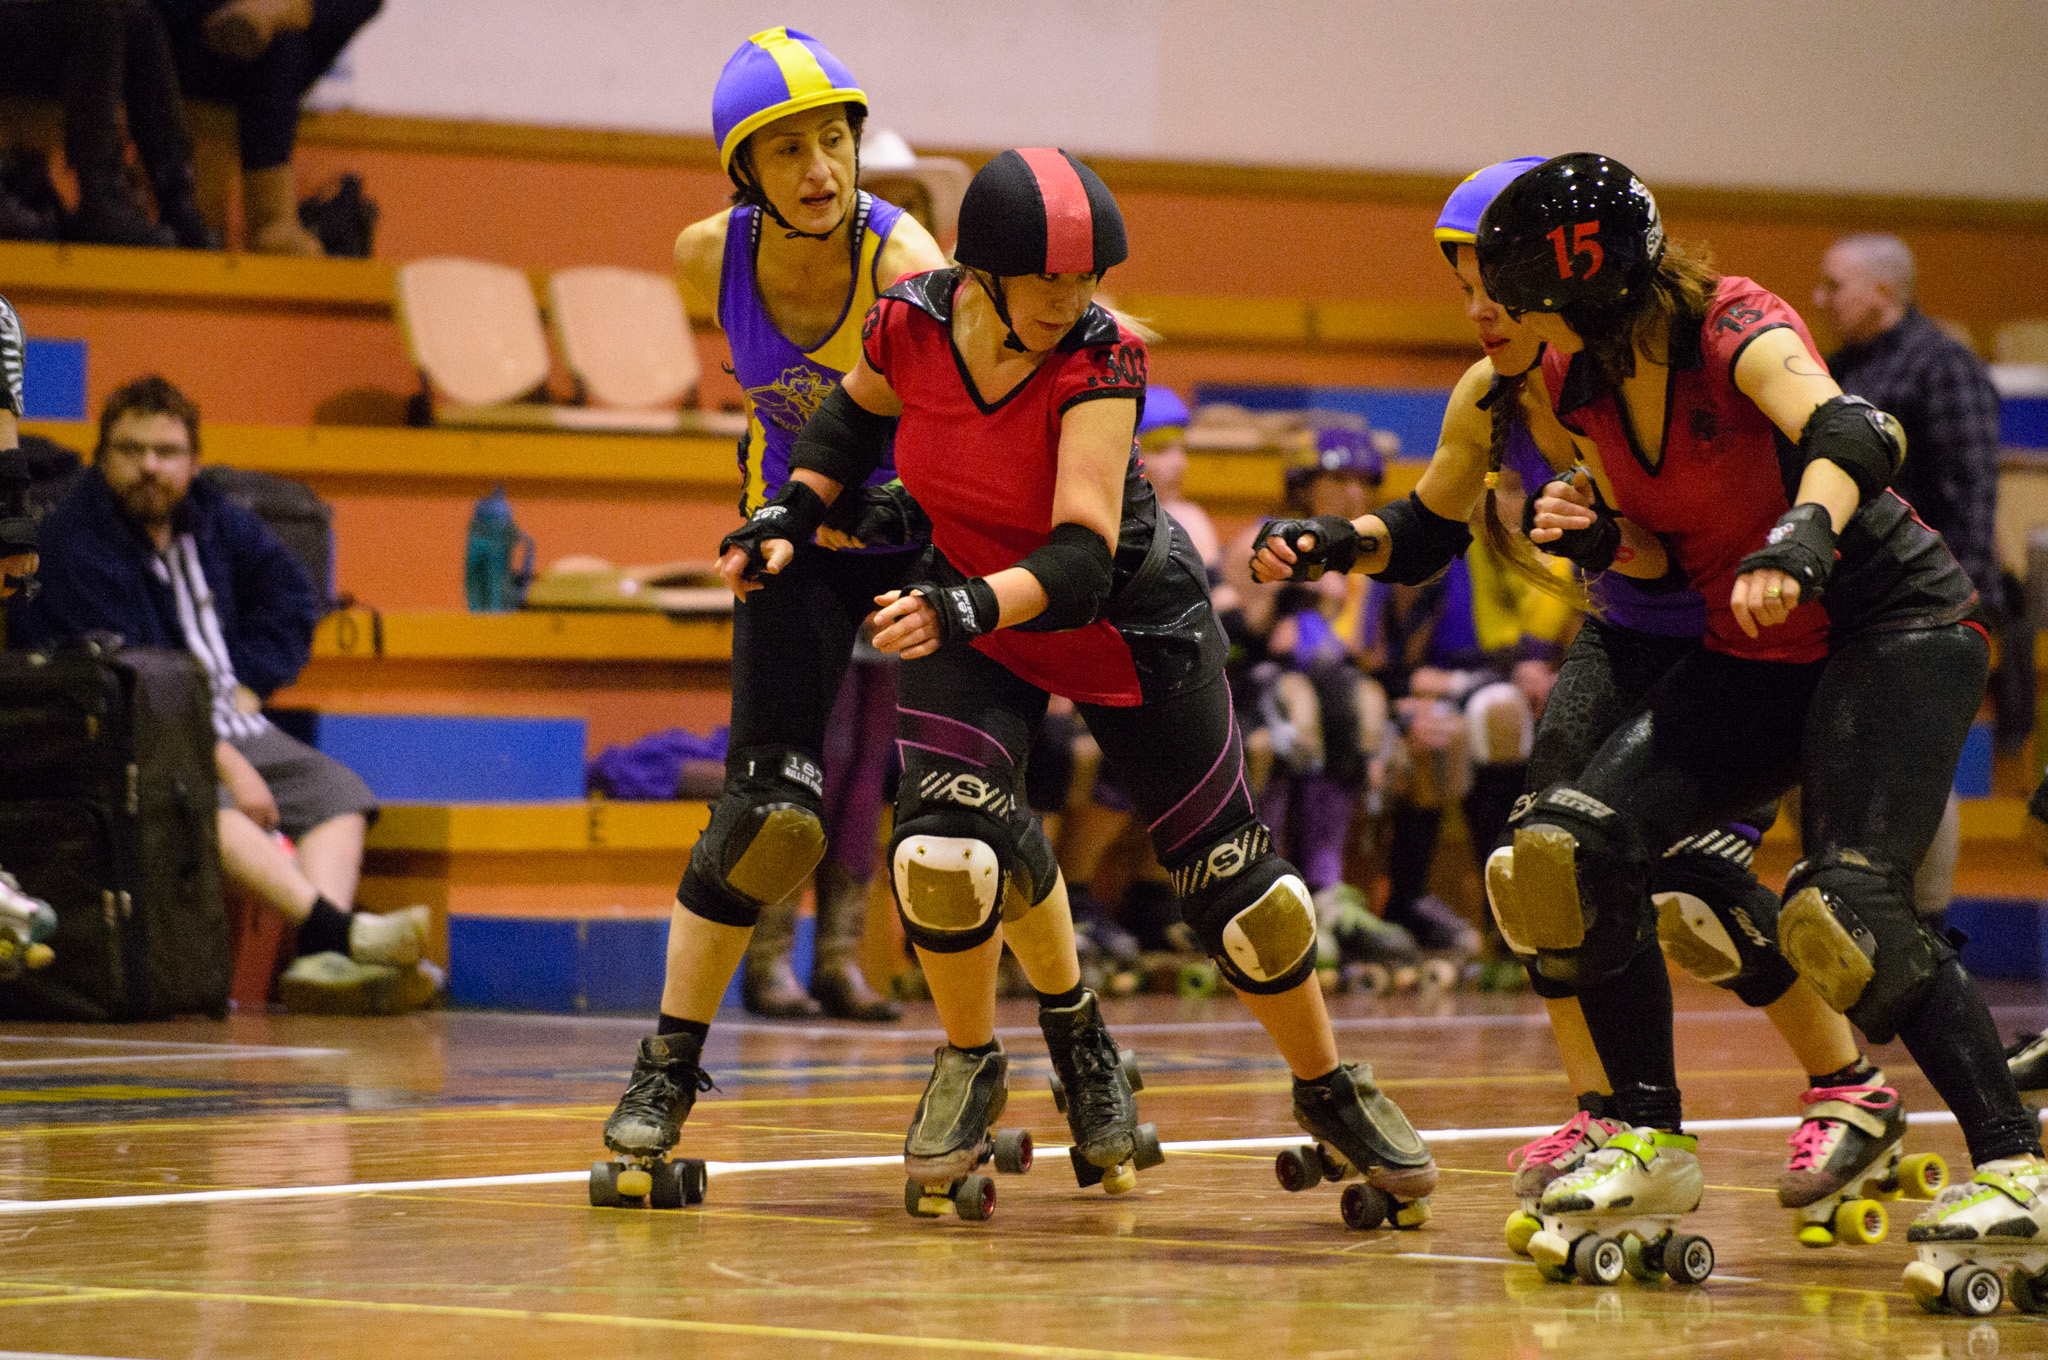 CRDL: Red Bellied Black Hearts v Brindabelters. Photographer: Brett Sargeant, D-eye Photography